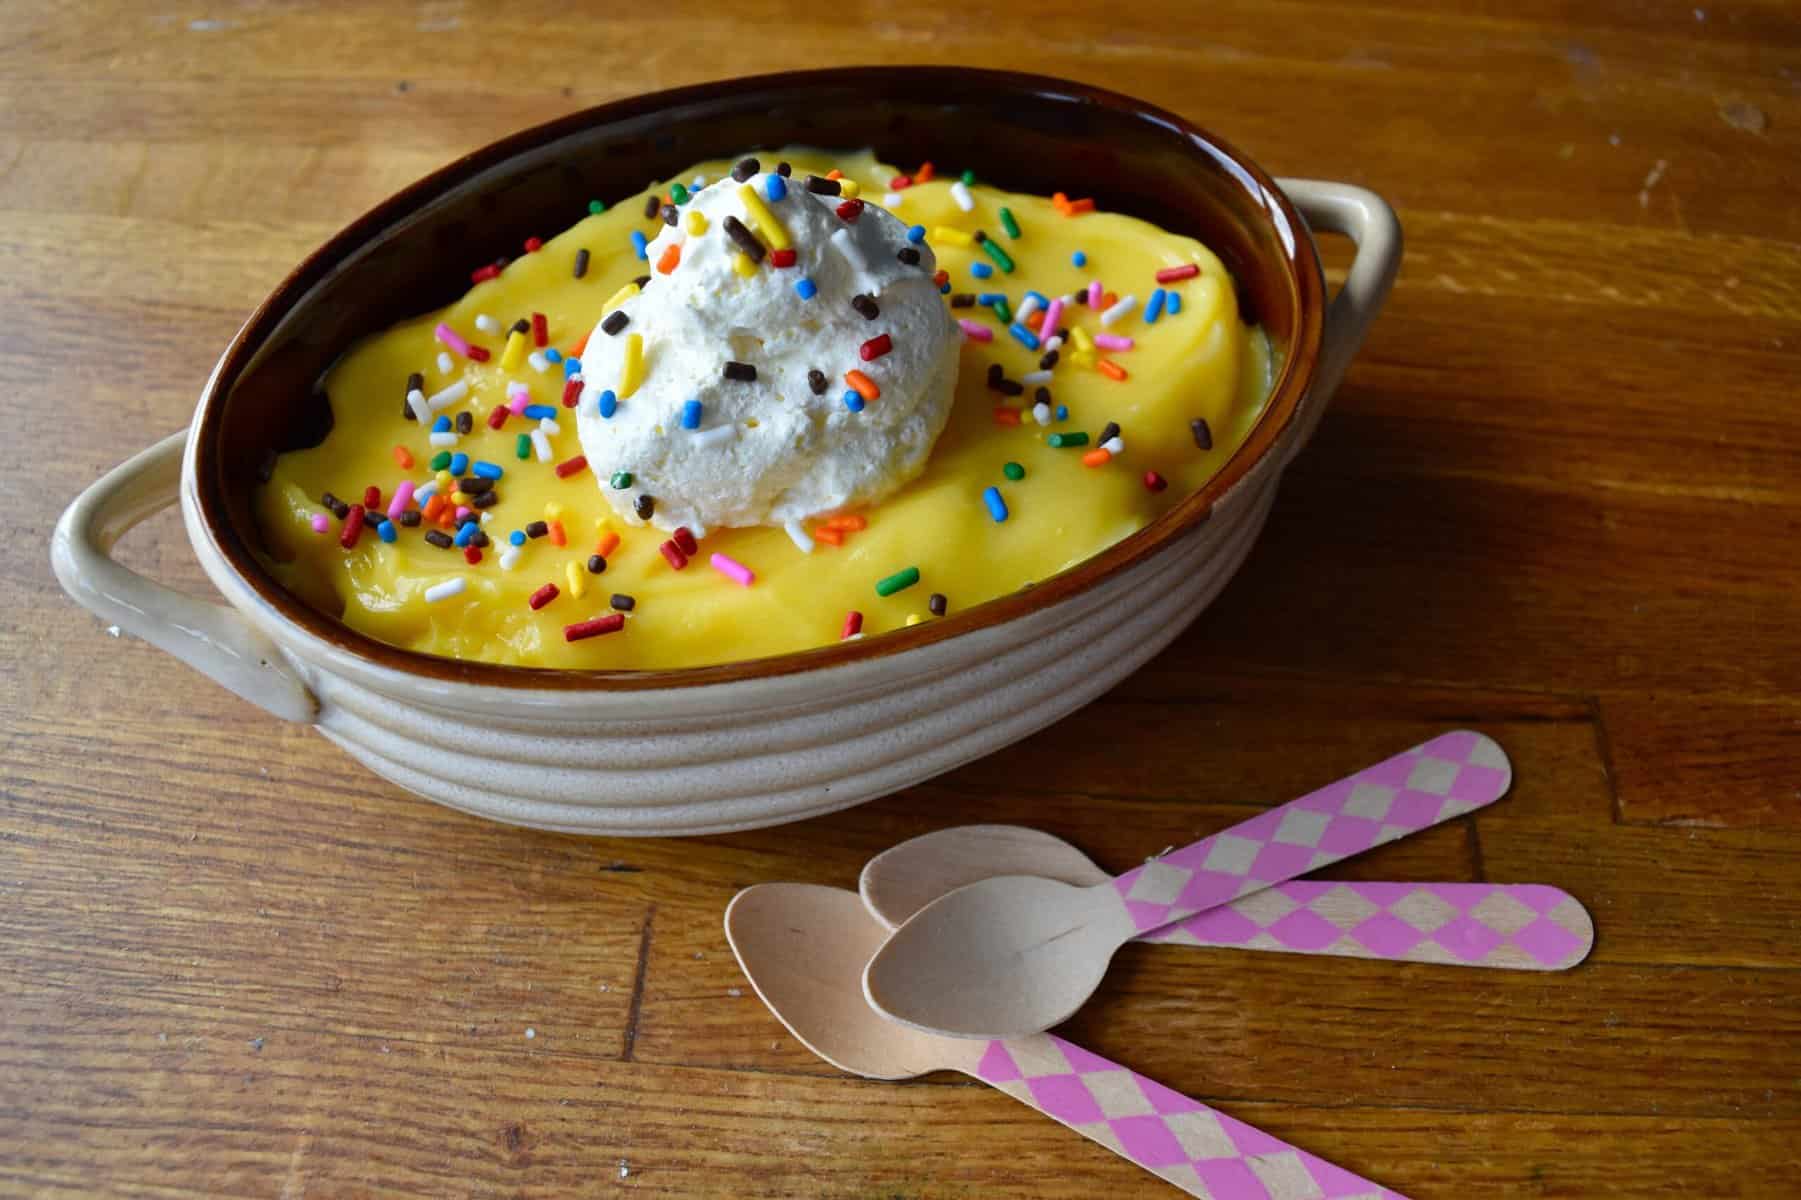  This vanilla pudding will take you on a trip down memory lane.